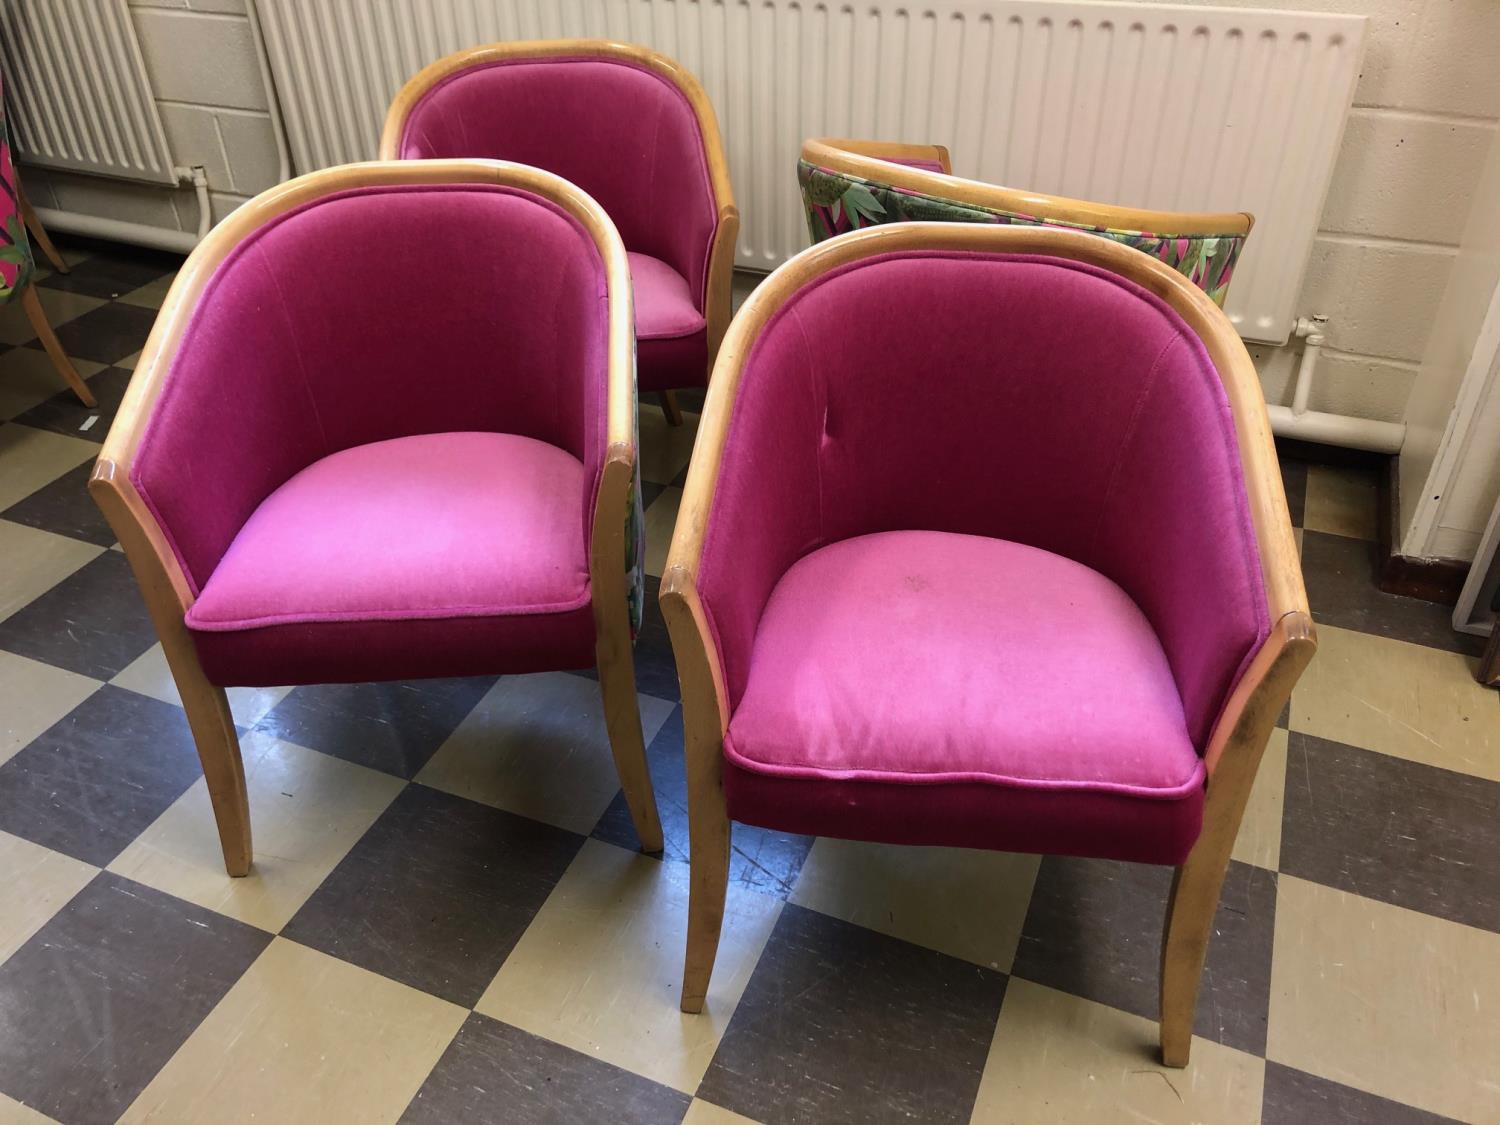 Set of 4 tub chairs with pink fabric, with patterned fabric on reverse.